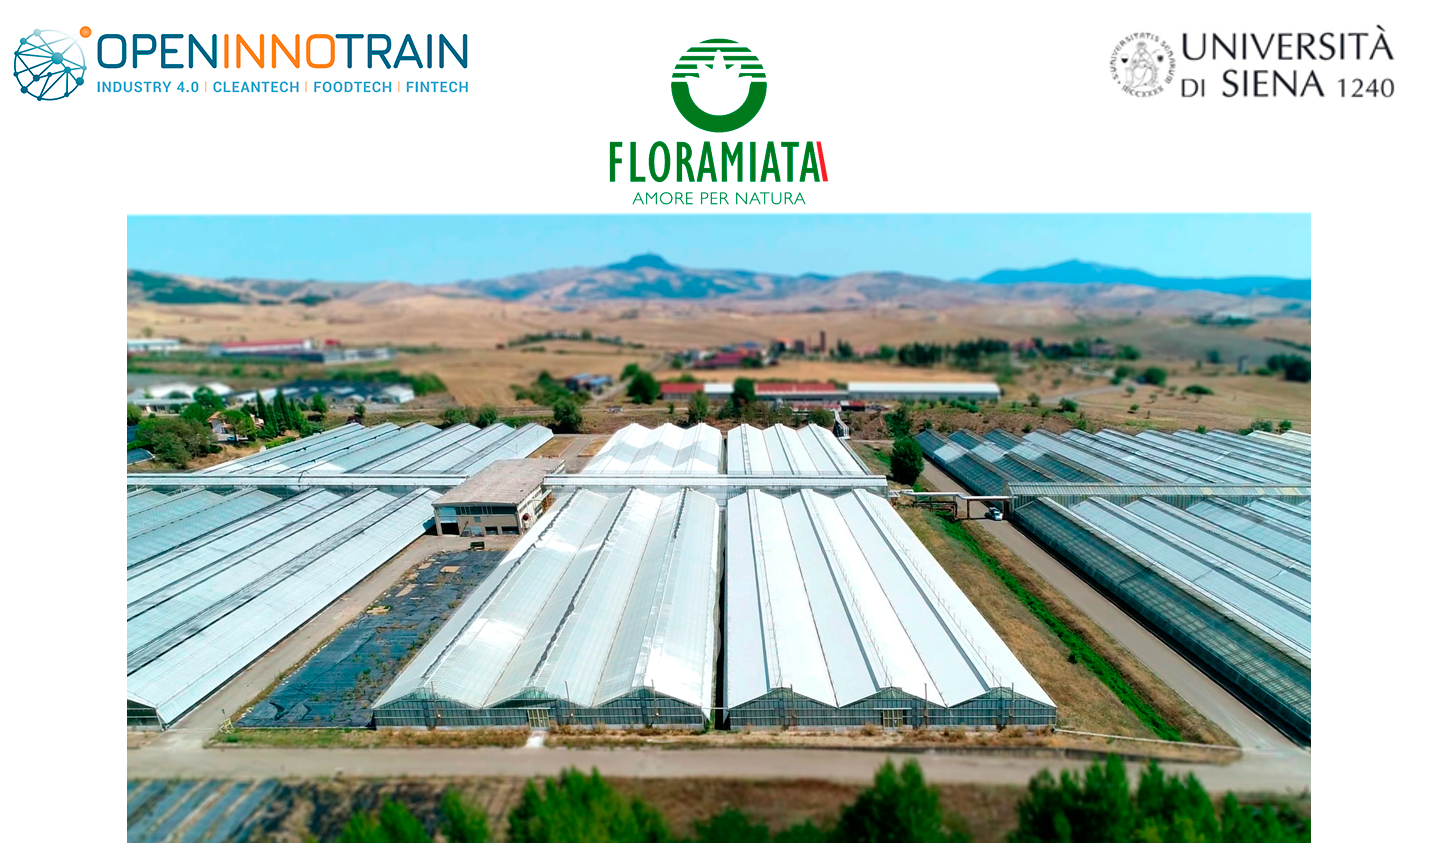 On June 13th Floramiata will be at the Open Innovation Challenges for FoodTech and CleanTech